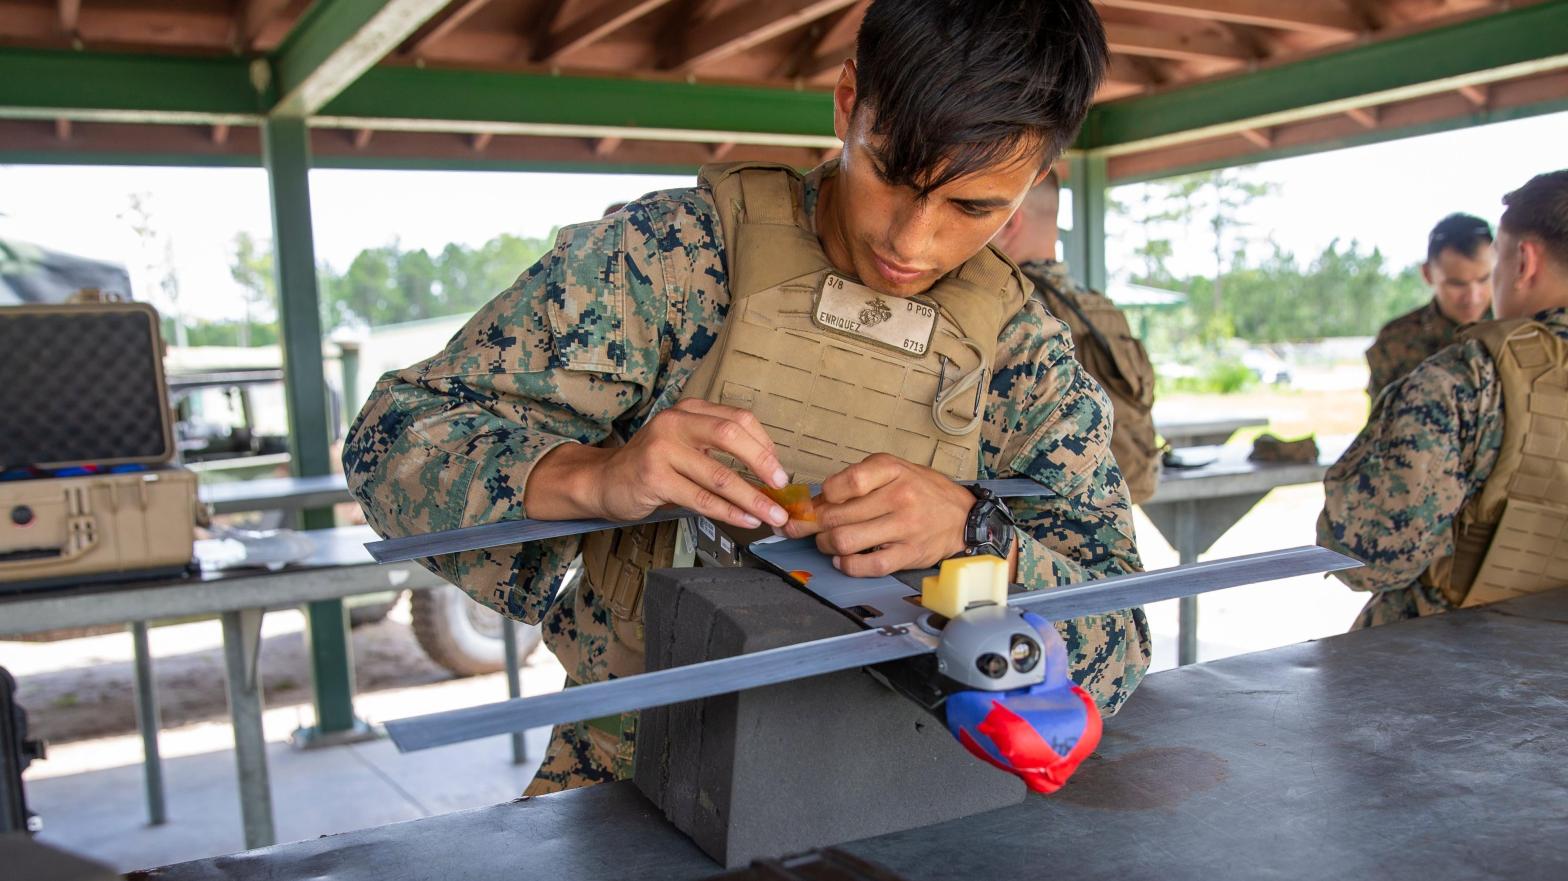 While the specs are still classified, the Phoenix Ghost is supposed to be similar to the Switchblade drone, seen here being prepared for launch during a training exercise at Camp Lejeune, North Carolina on July 7, 2021. (Photo: DVIDS / U.S. Marine Corps photo by Pfc. Sarah Pysher)